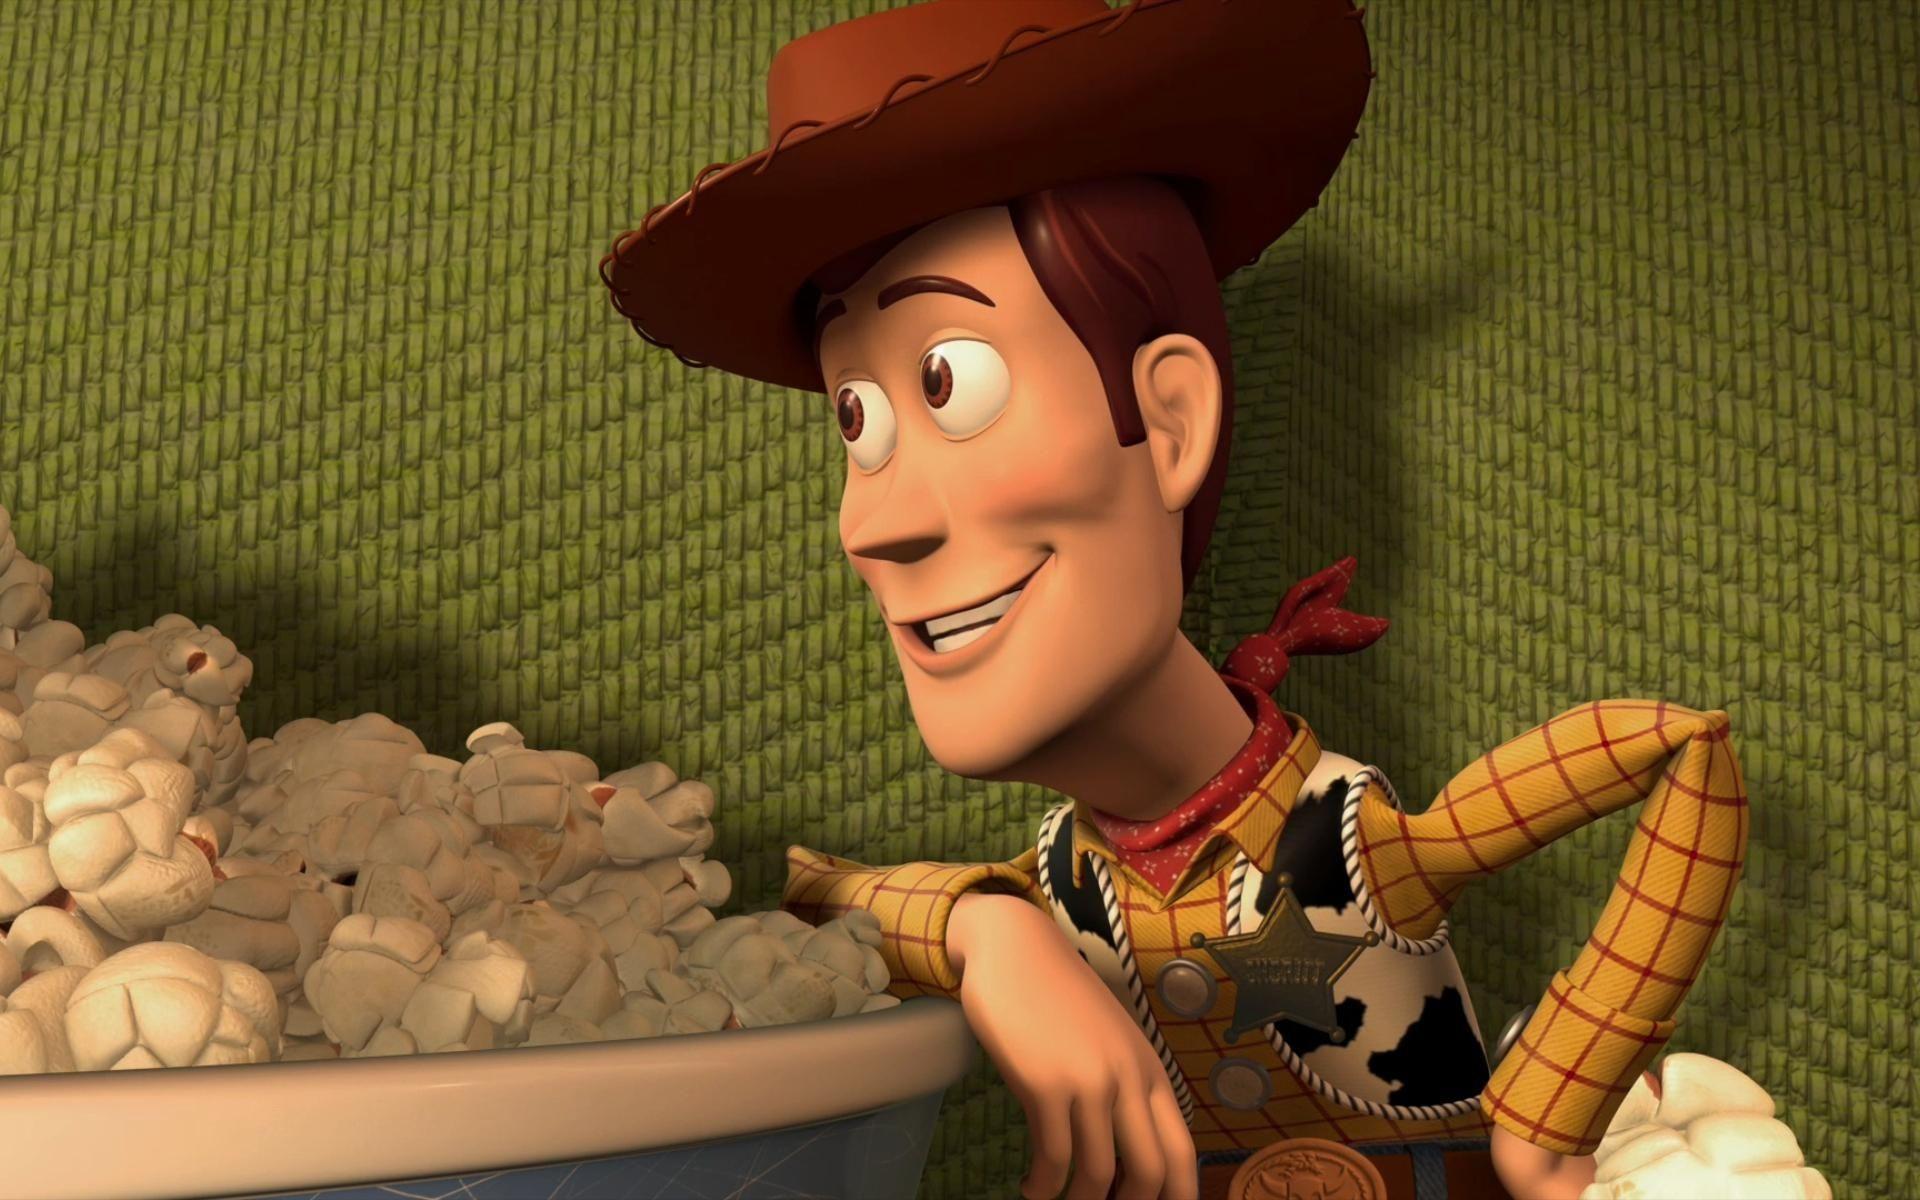 Toy story woody wallpaper image, Toy story woody